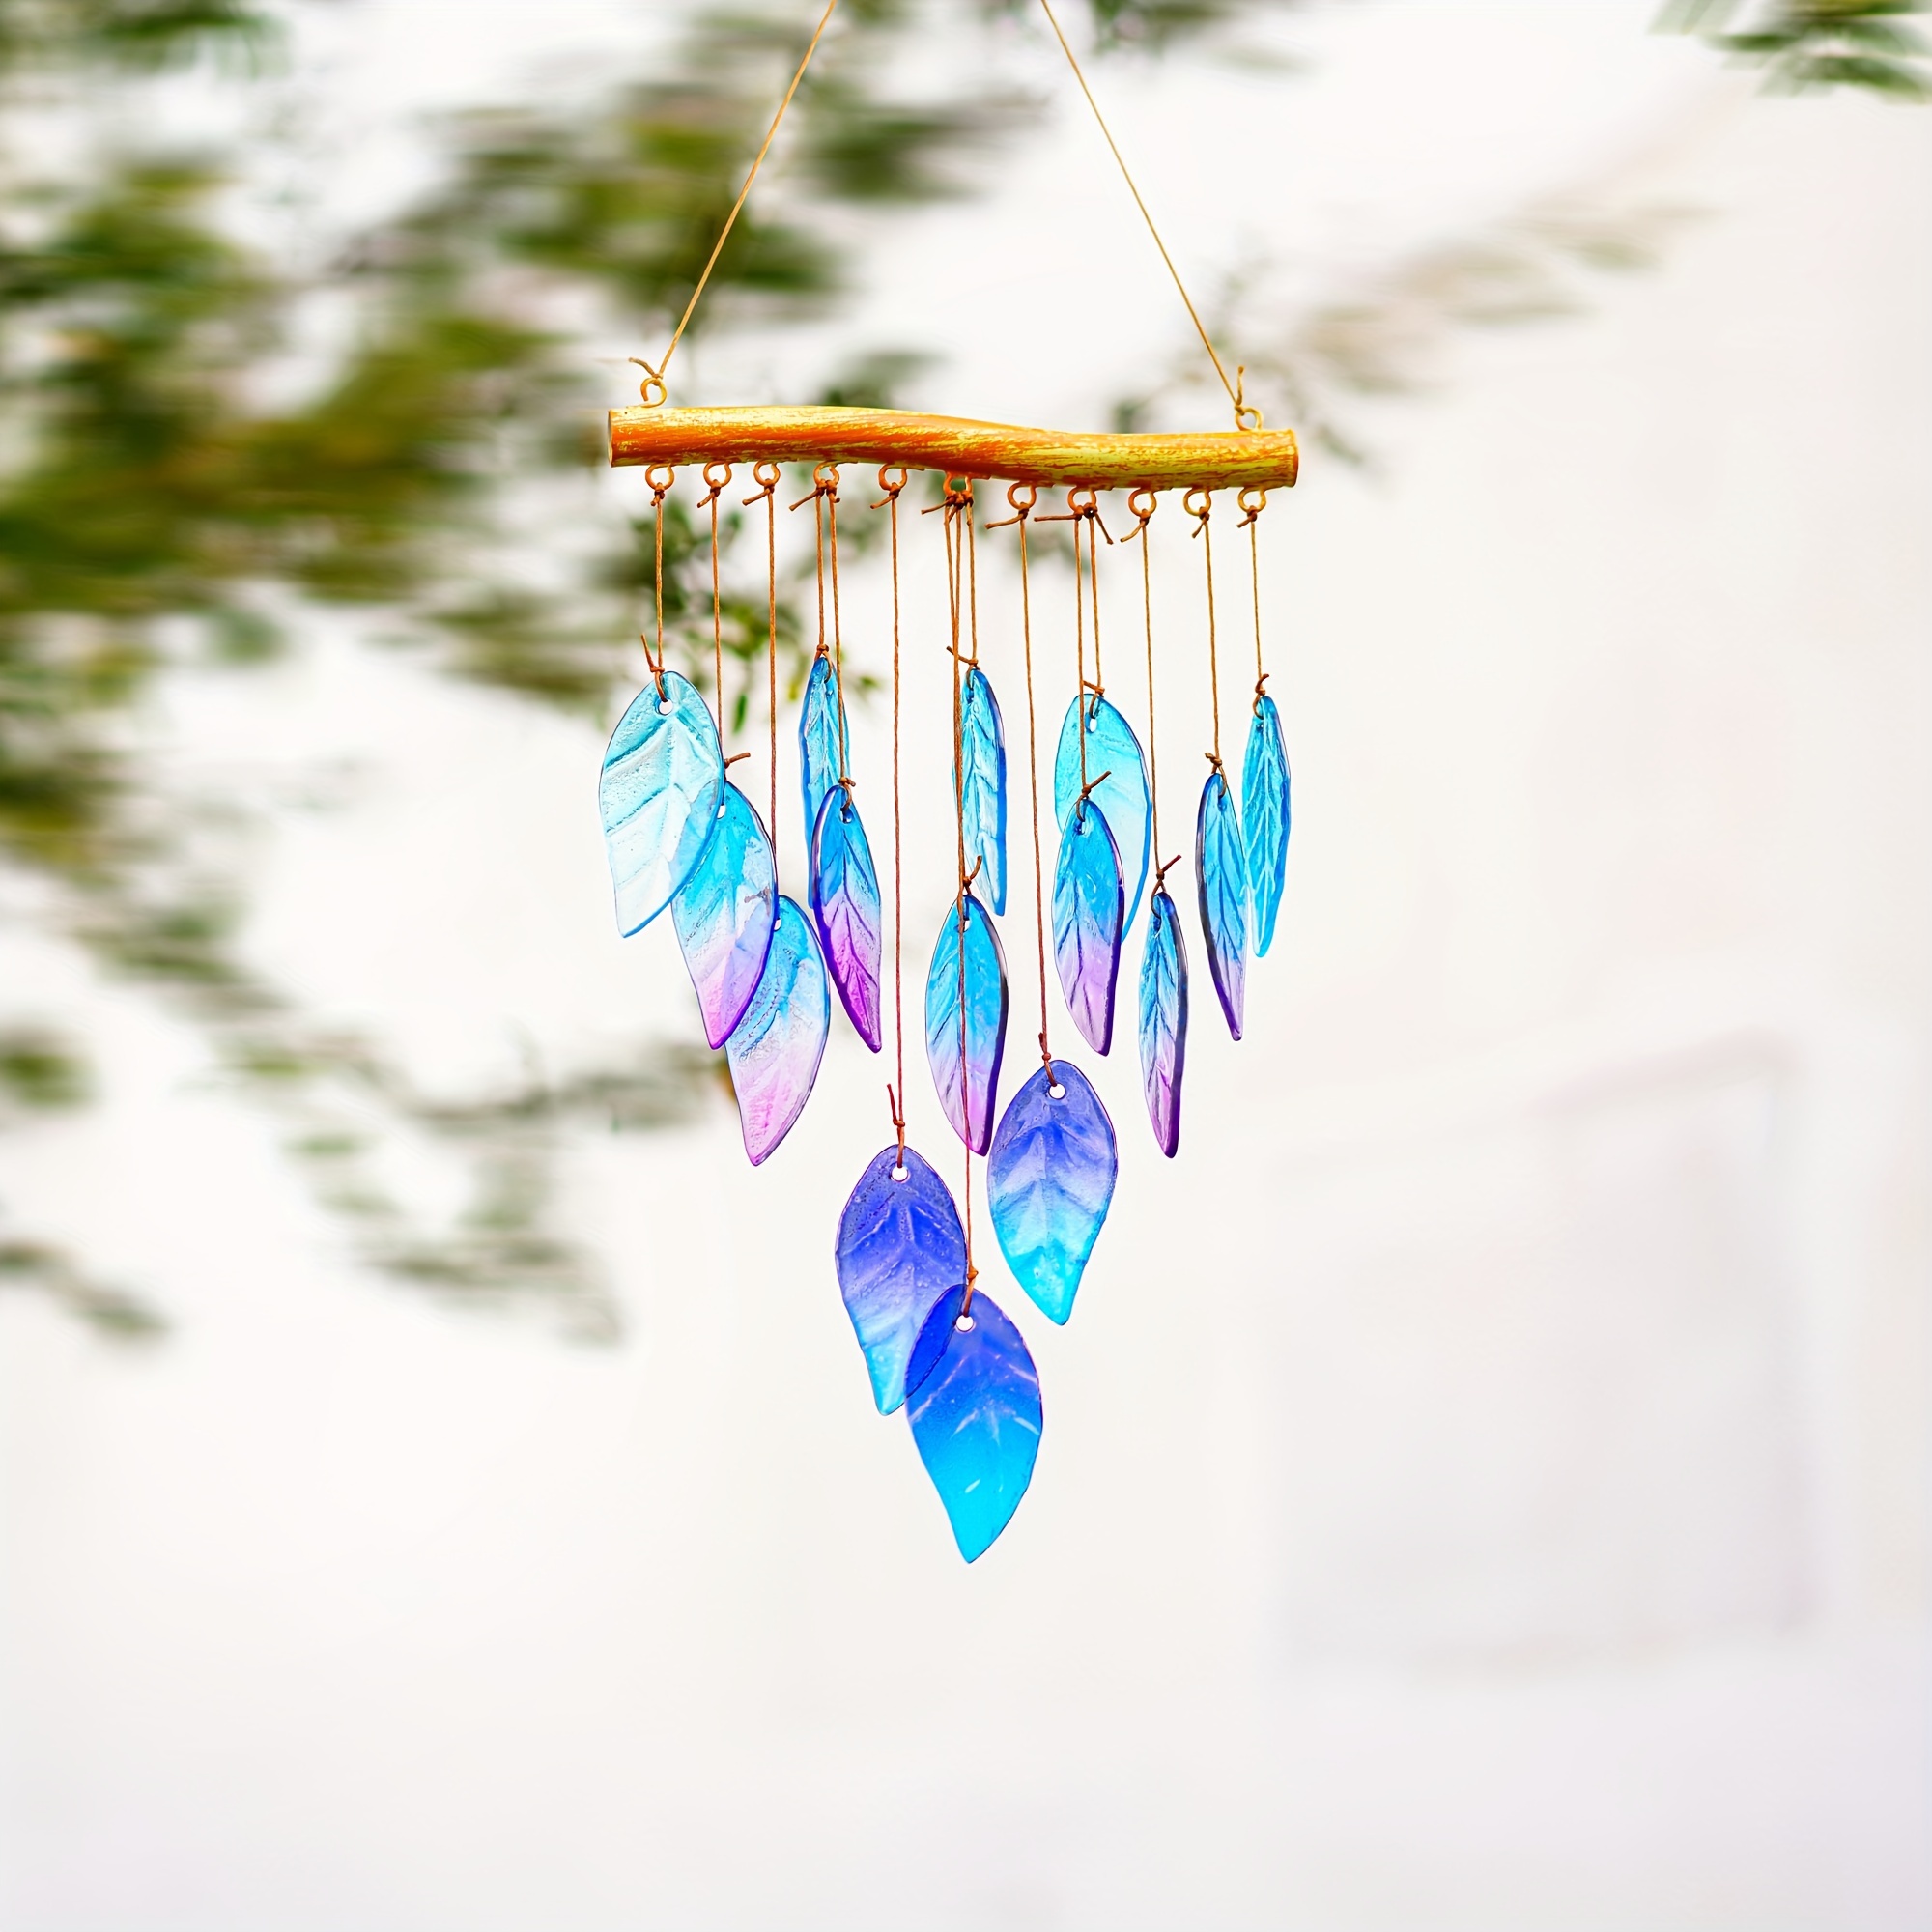 

Handcrafted Stained Glass Leaf Wind Chimes, Garden Style Hanging Decoration, Glass Material, Non-electric, Featherless Outdoor Wind Chime For Patio, Backyard, And Garden Decor